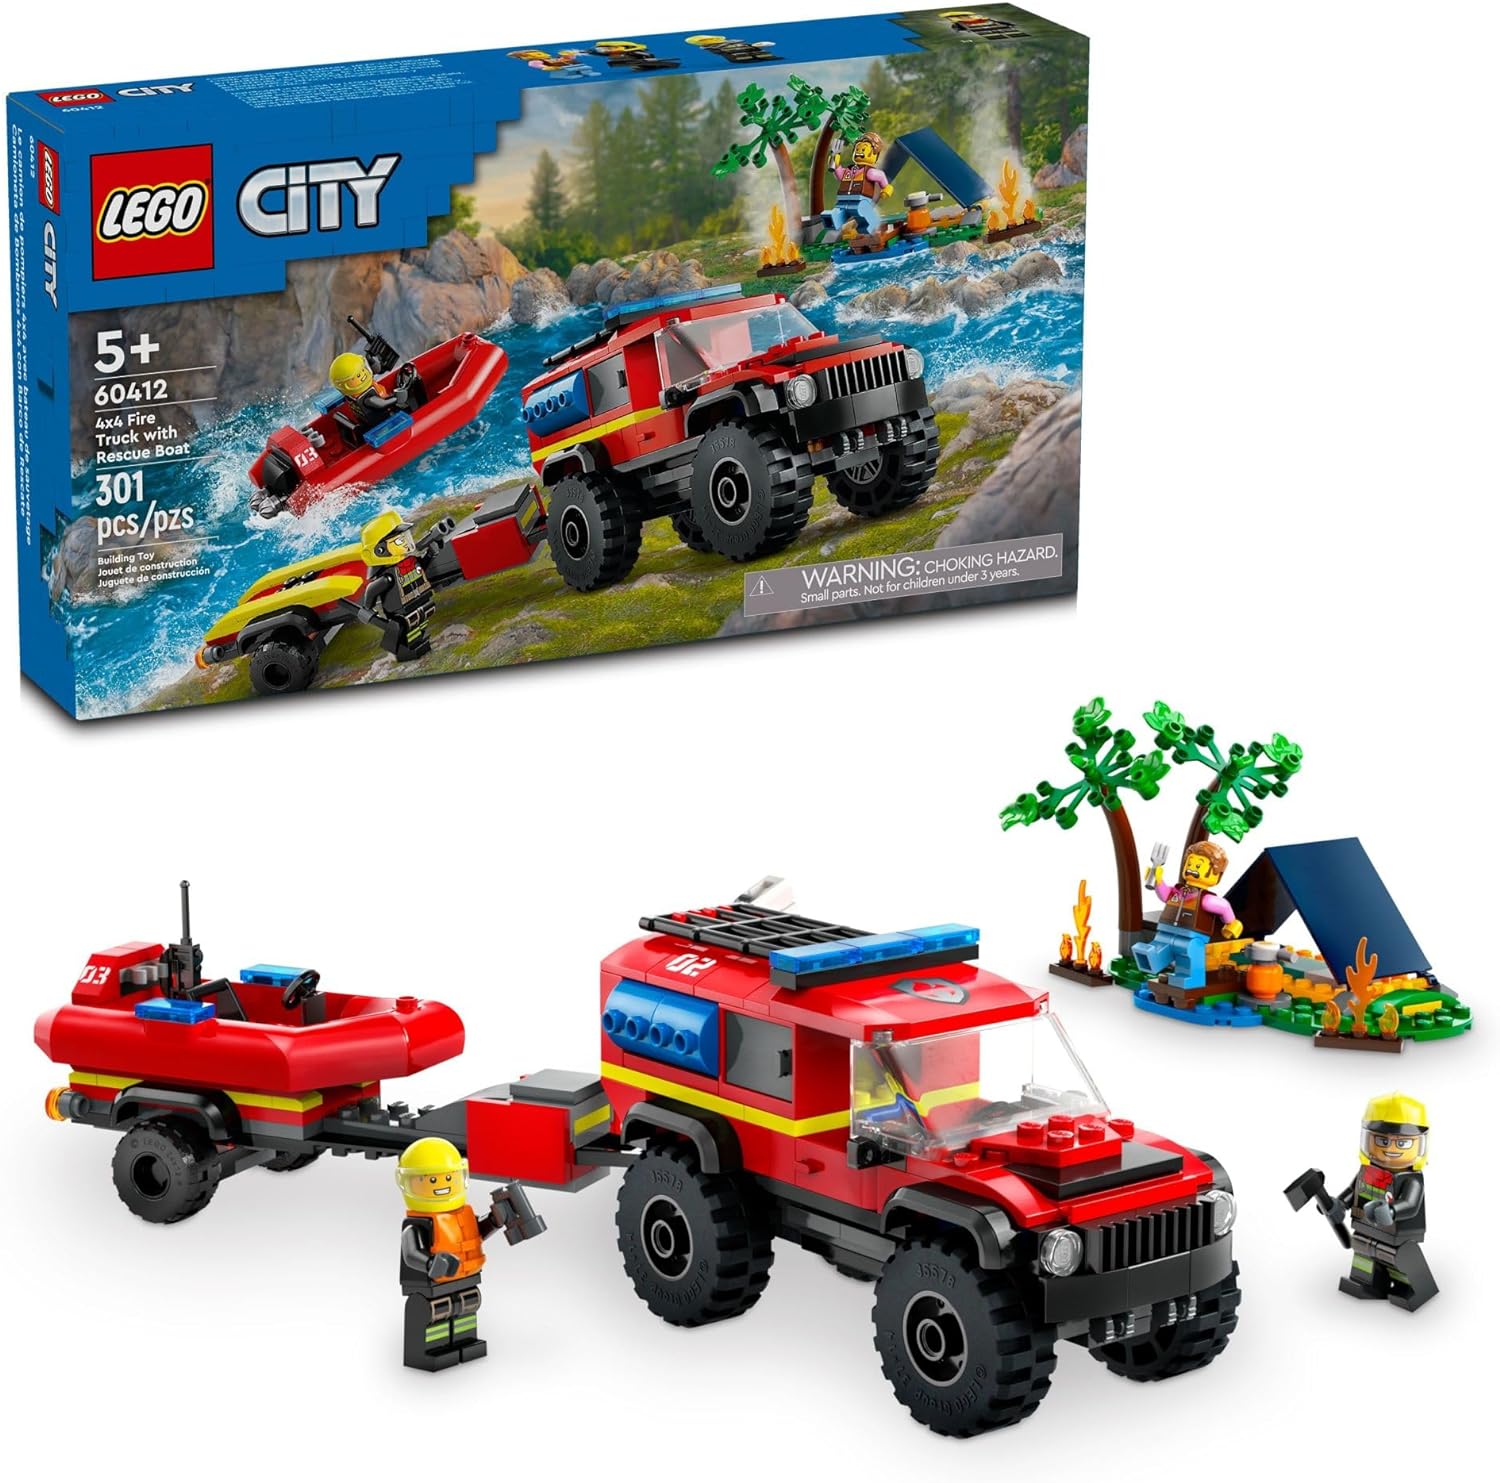 LEGO 60412 City 4x4 Fire Truck with Rescue Boat Toy for Kids Ages 5 and Up, Pretend Play Toy for Boys and Girls with a Truck Toy, Trailer, Dinghy and Tent, Plus 1 Camper and 2 Firefighter Minifigures.